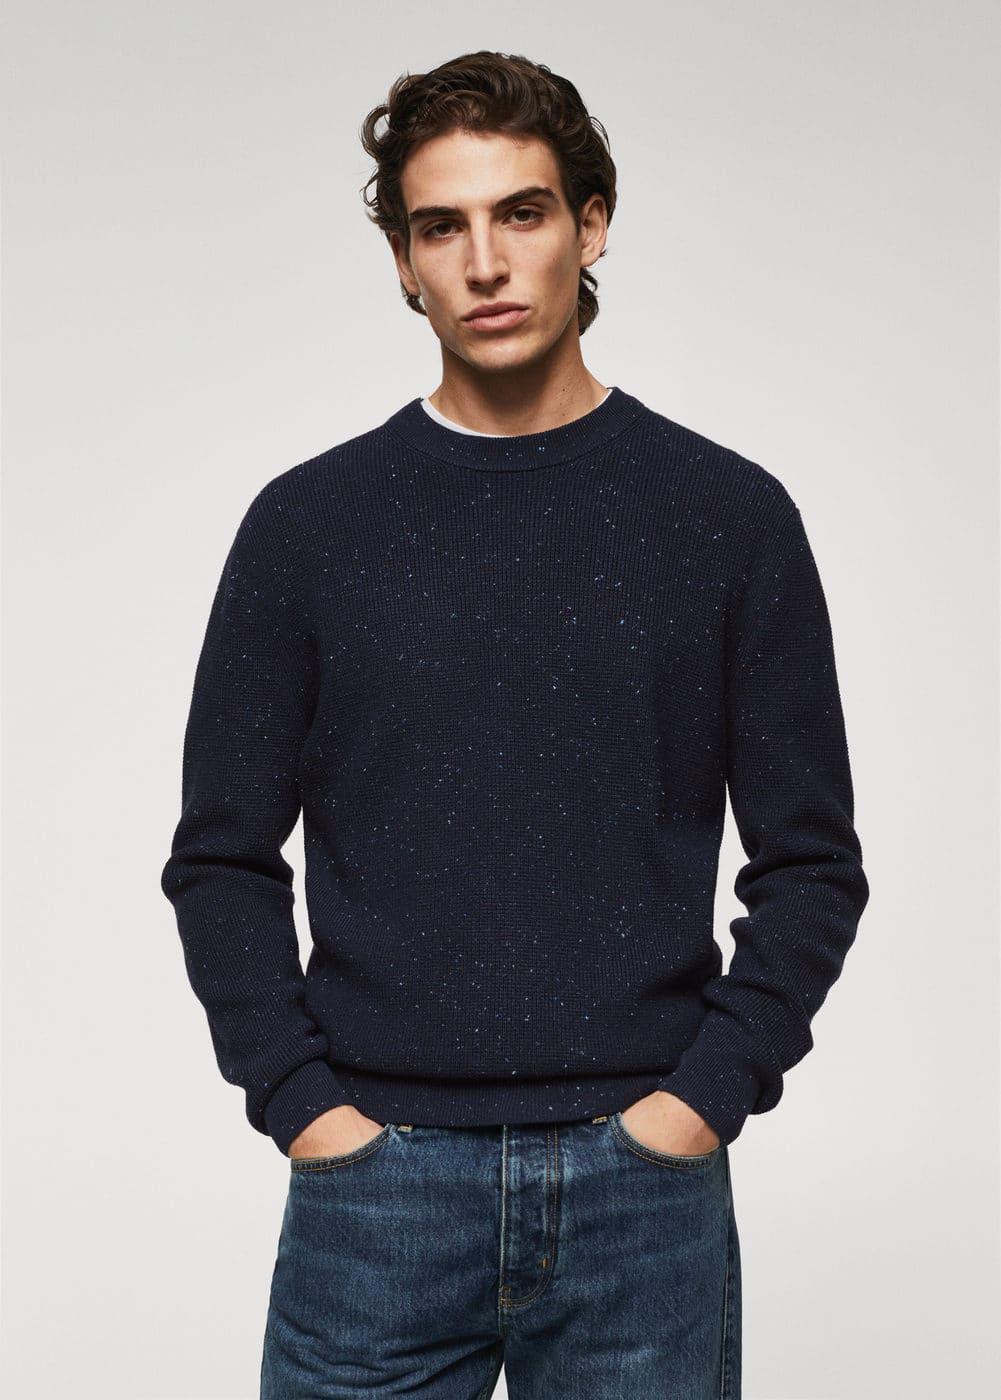 MANGO MAN - Structured flecked sweater navy - L - Men Product Image